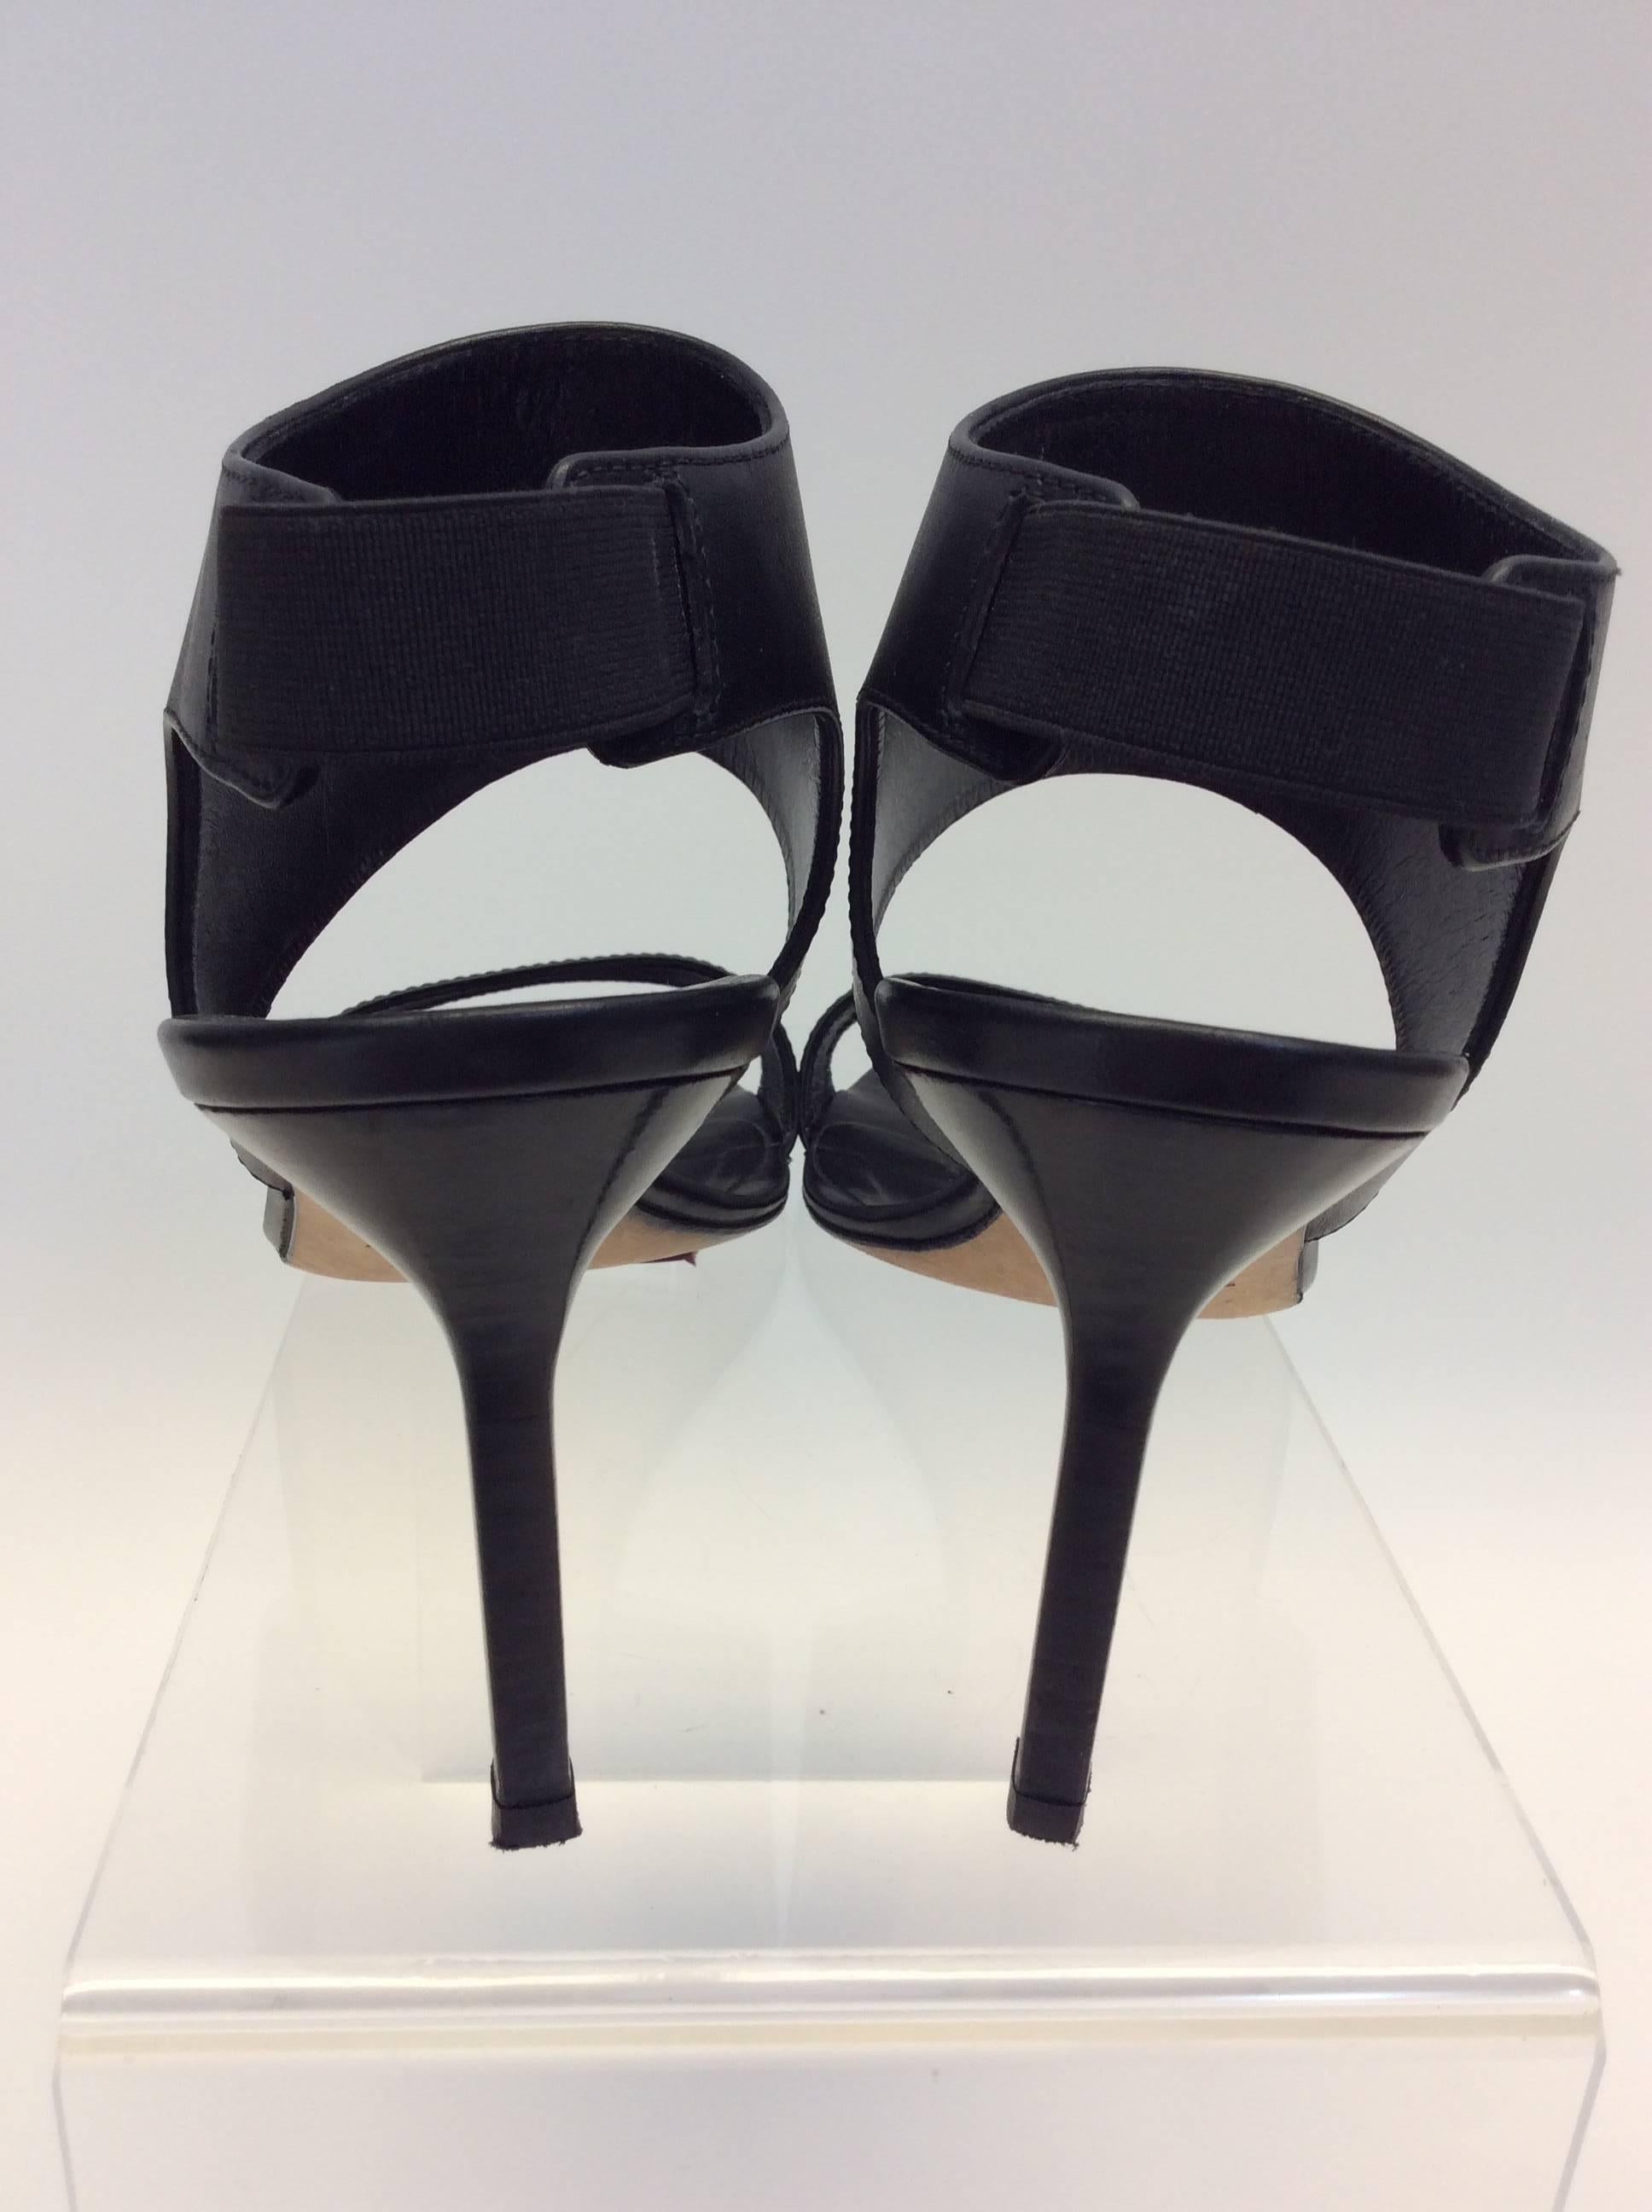 Manolo Blahnik Black Leather Heels In Excellent Condition For Sale In Narberth, PA